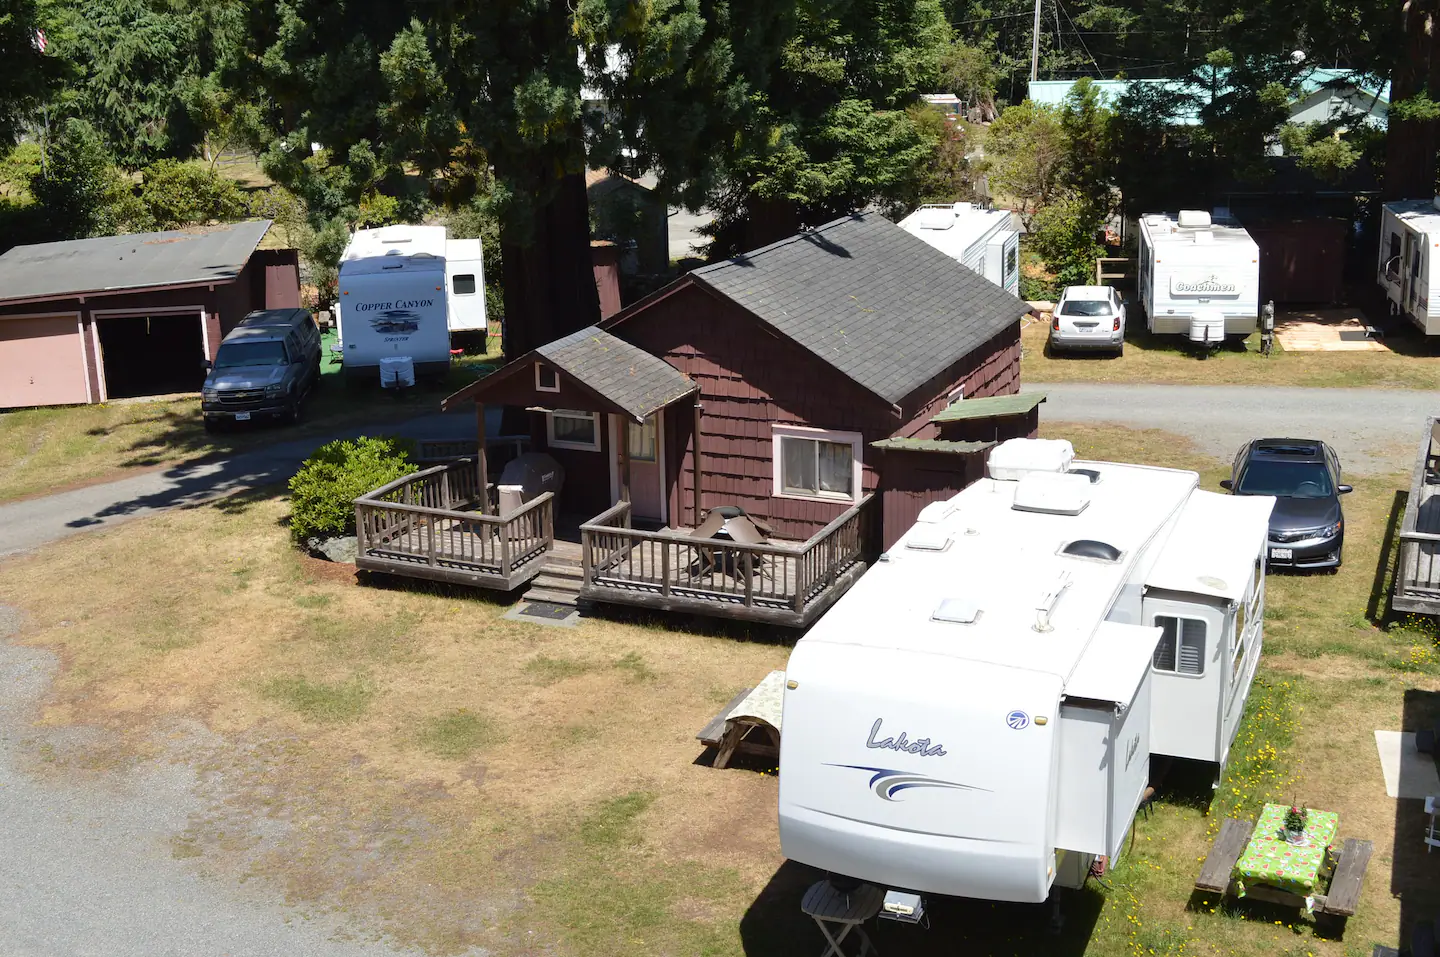 May through September we have RV campers near the cabins. Here is Cabin 1 in peak RV season.